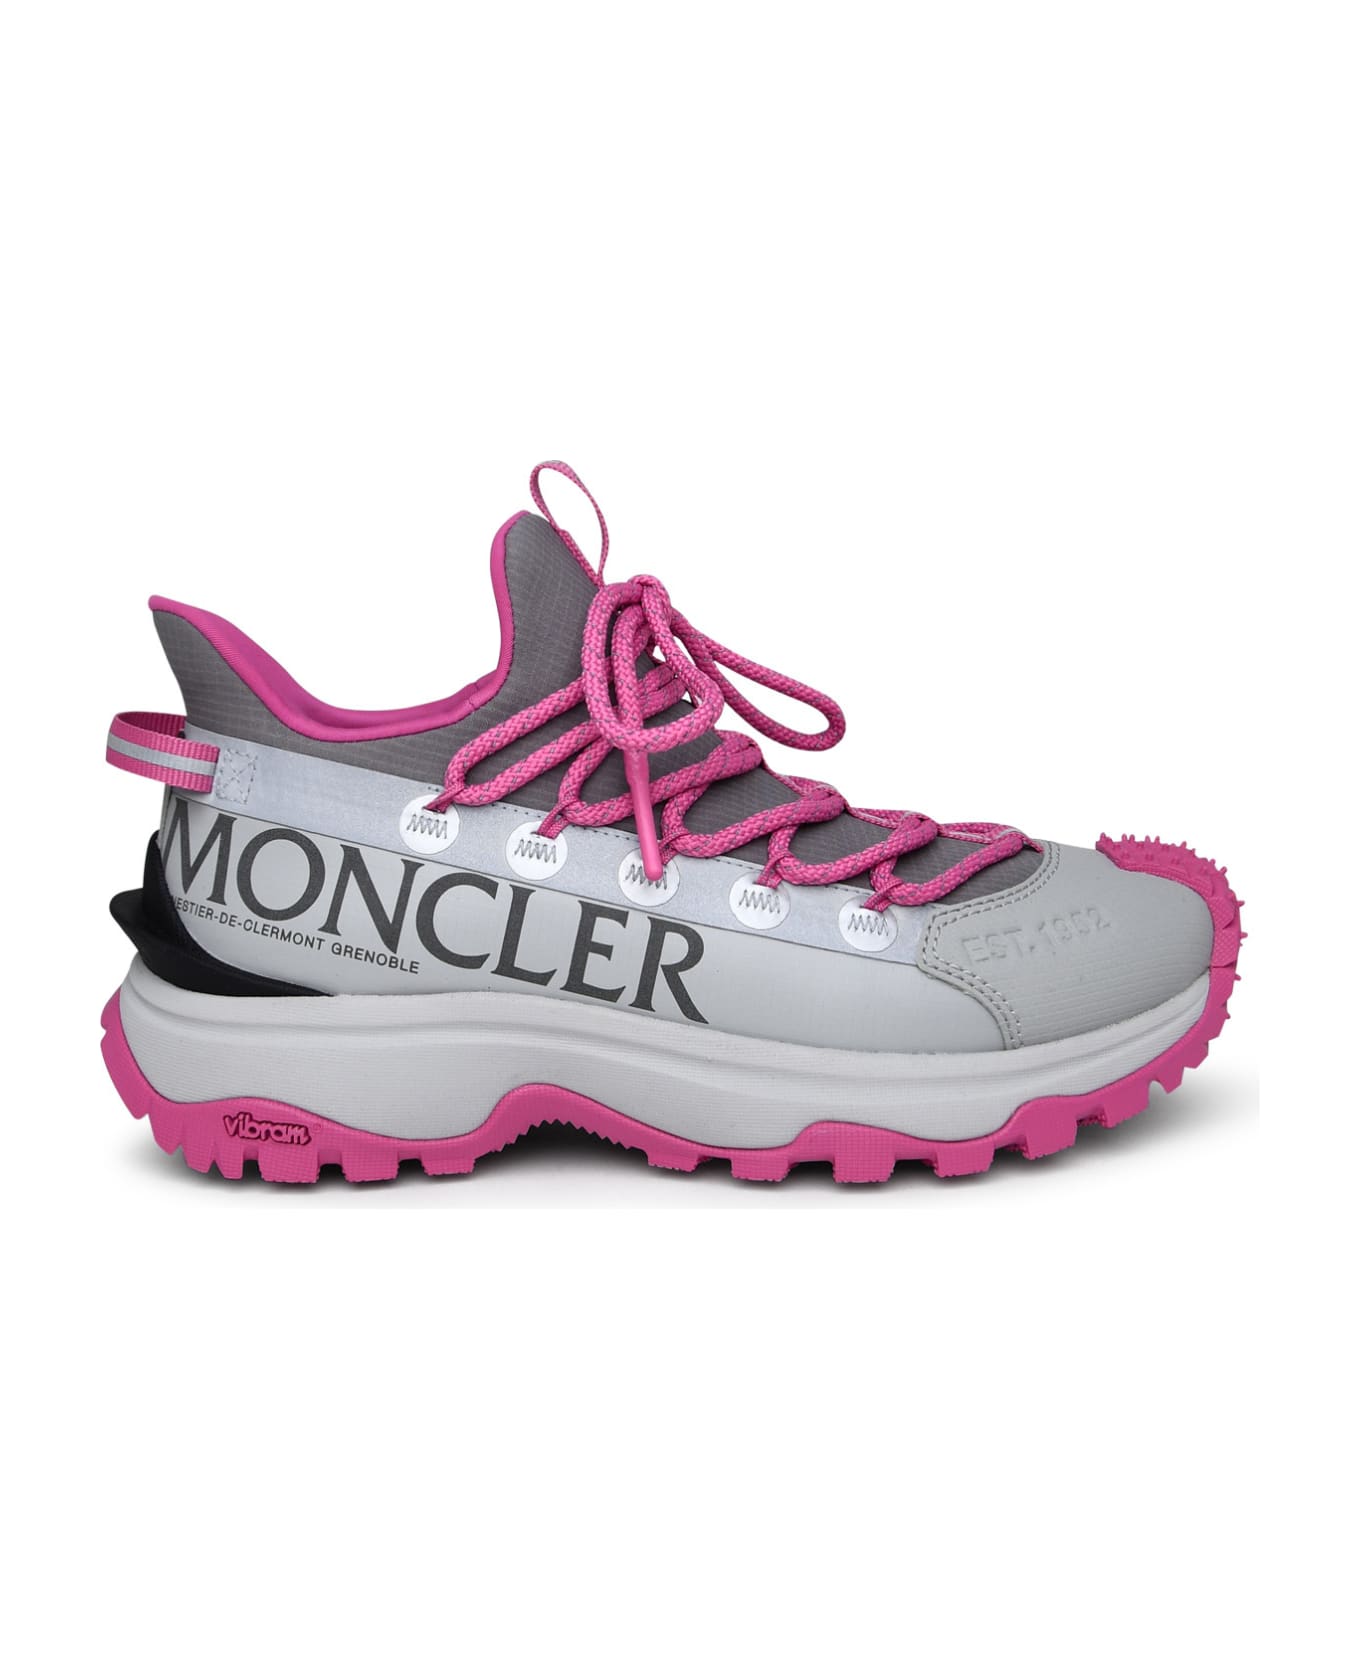 Moncler Trail Grip Sneakers In Gray Polyamide - Grey